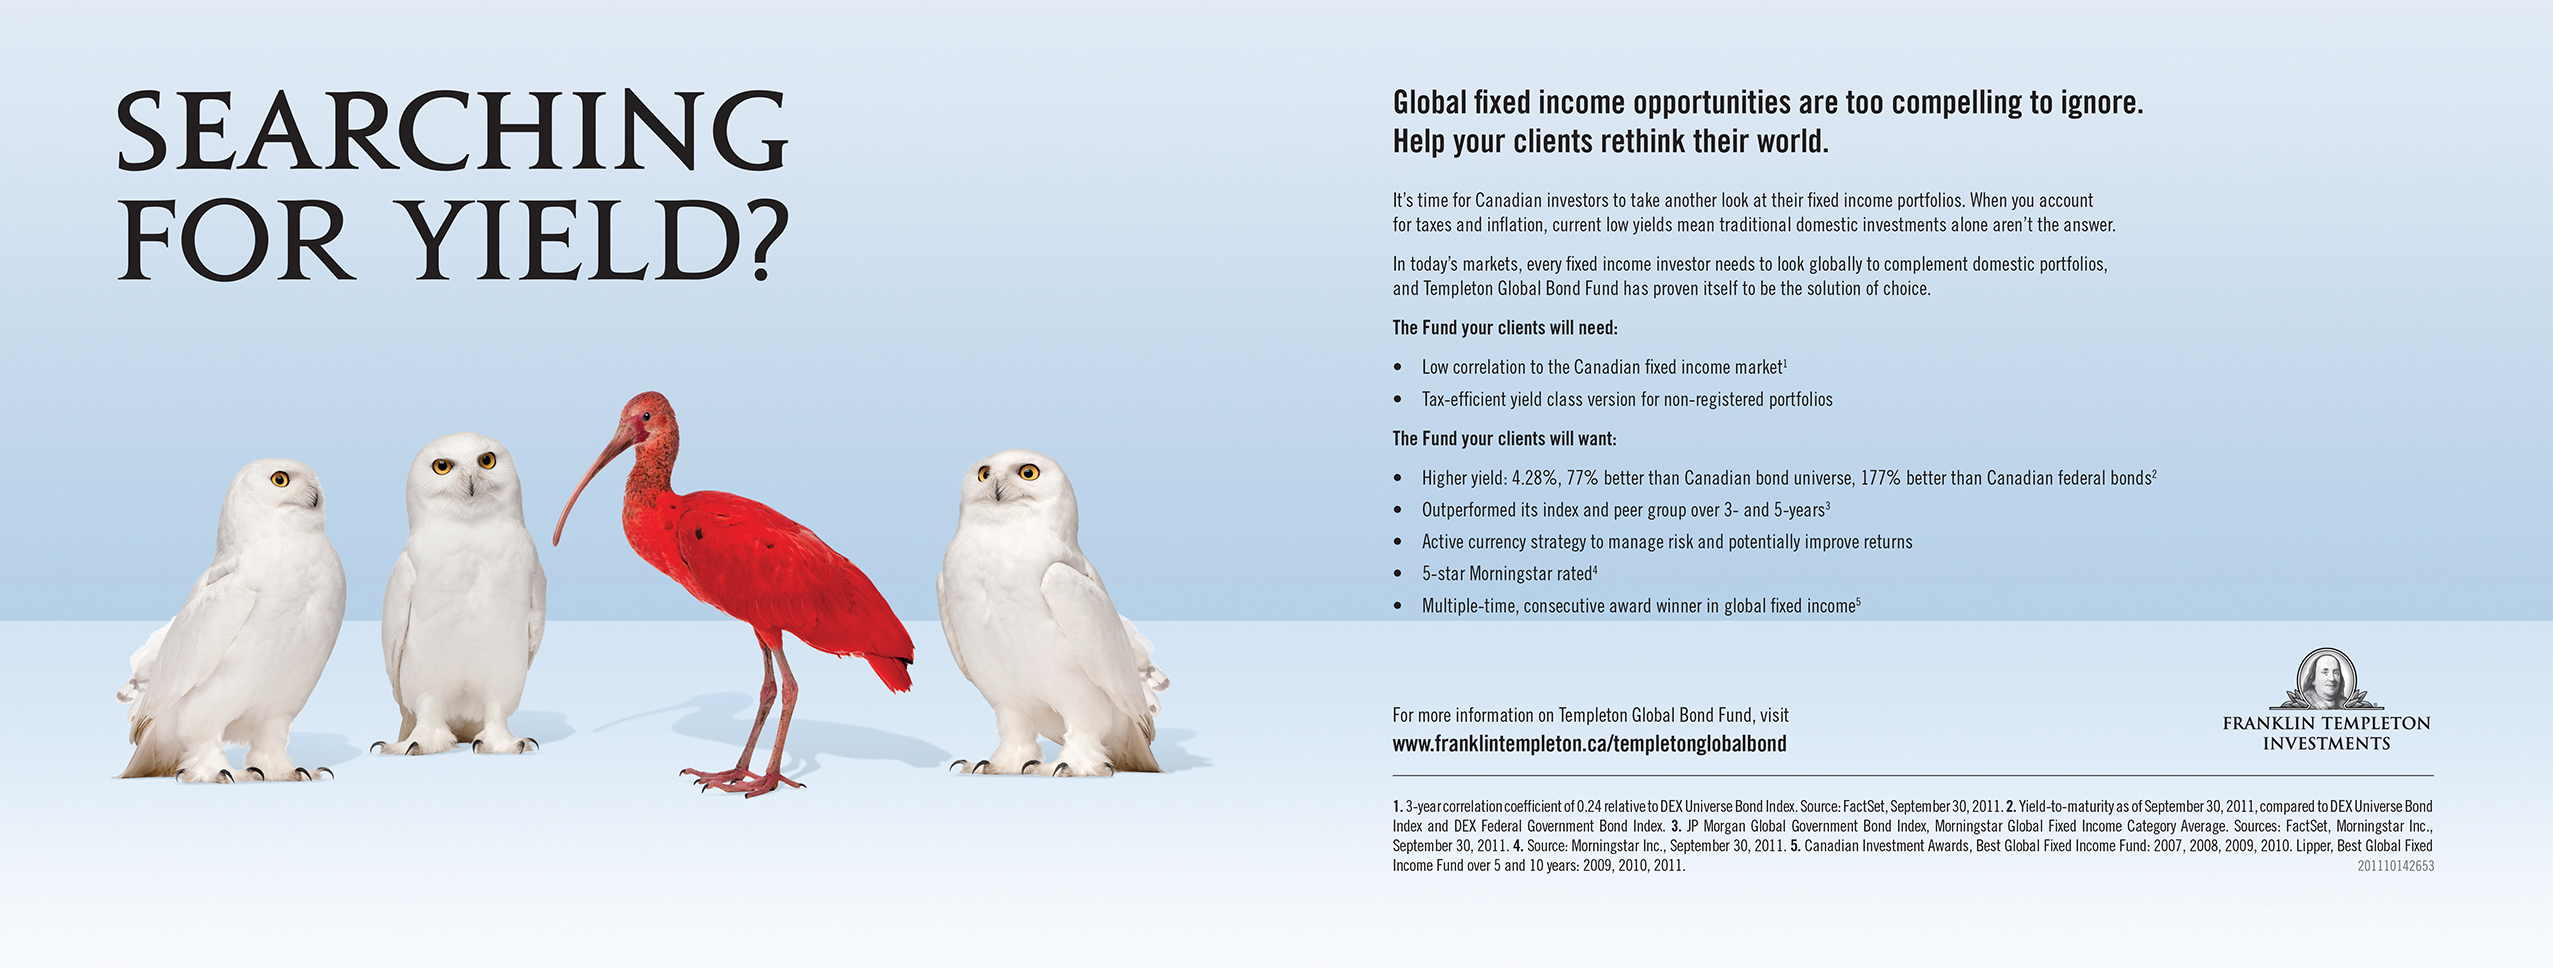 Franklin Templeton "searching for yield ad" featuring the concept of global investment opportunities using the image of three snowy owls and a scarlet ibis